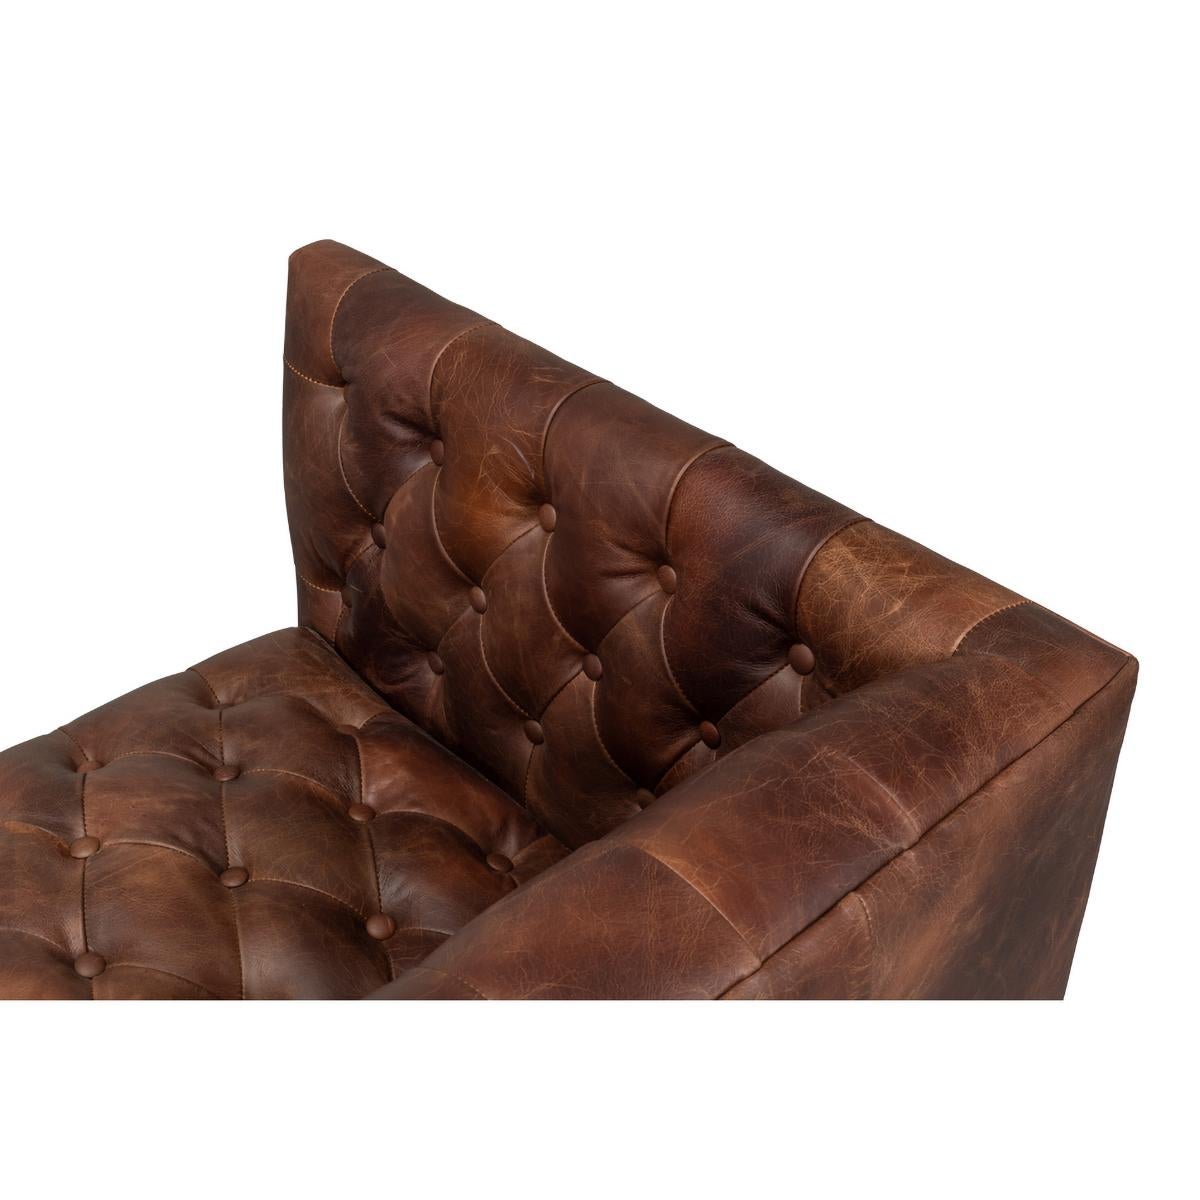 Contemporary Mid Century Tufted Leather Sofa For Sale